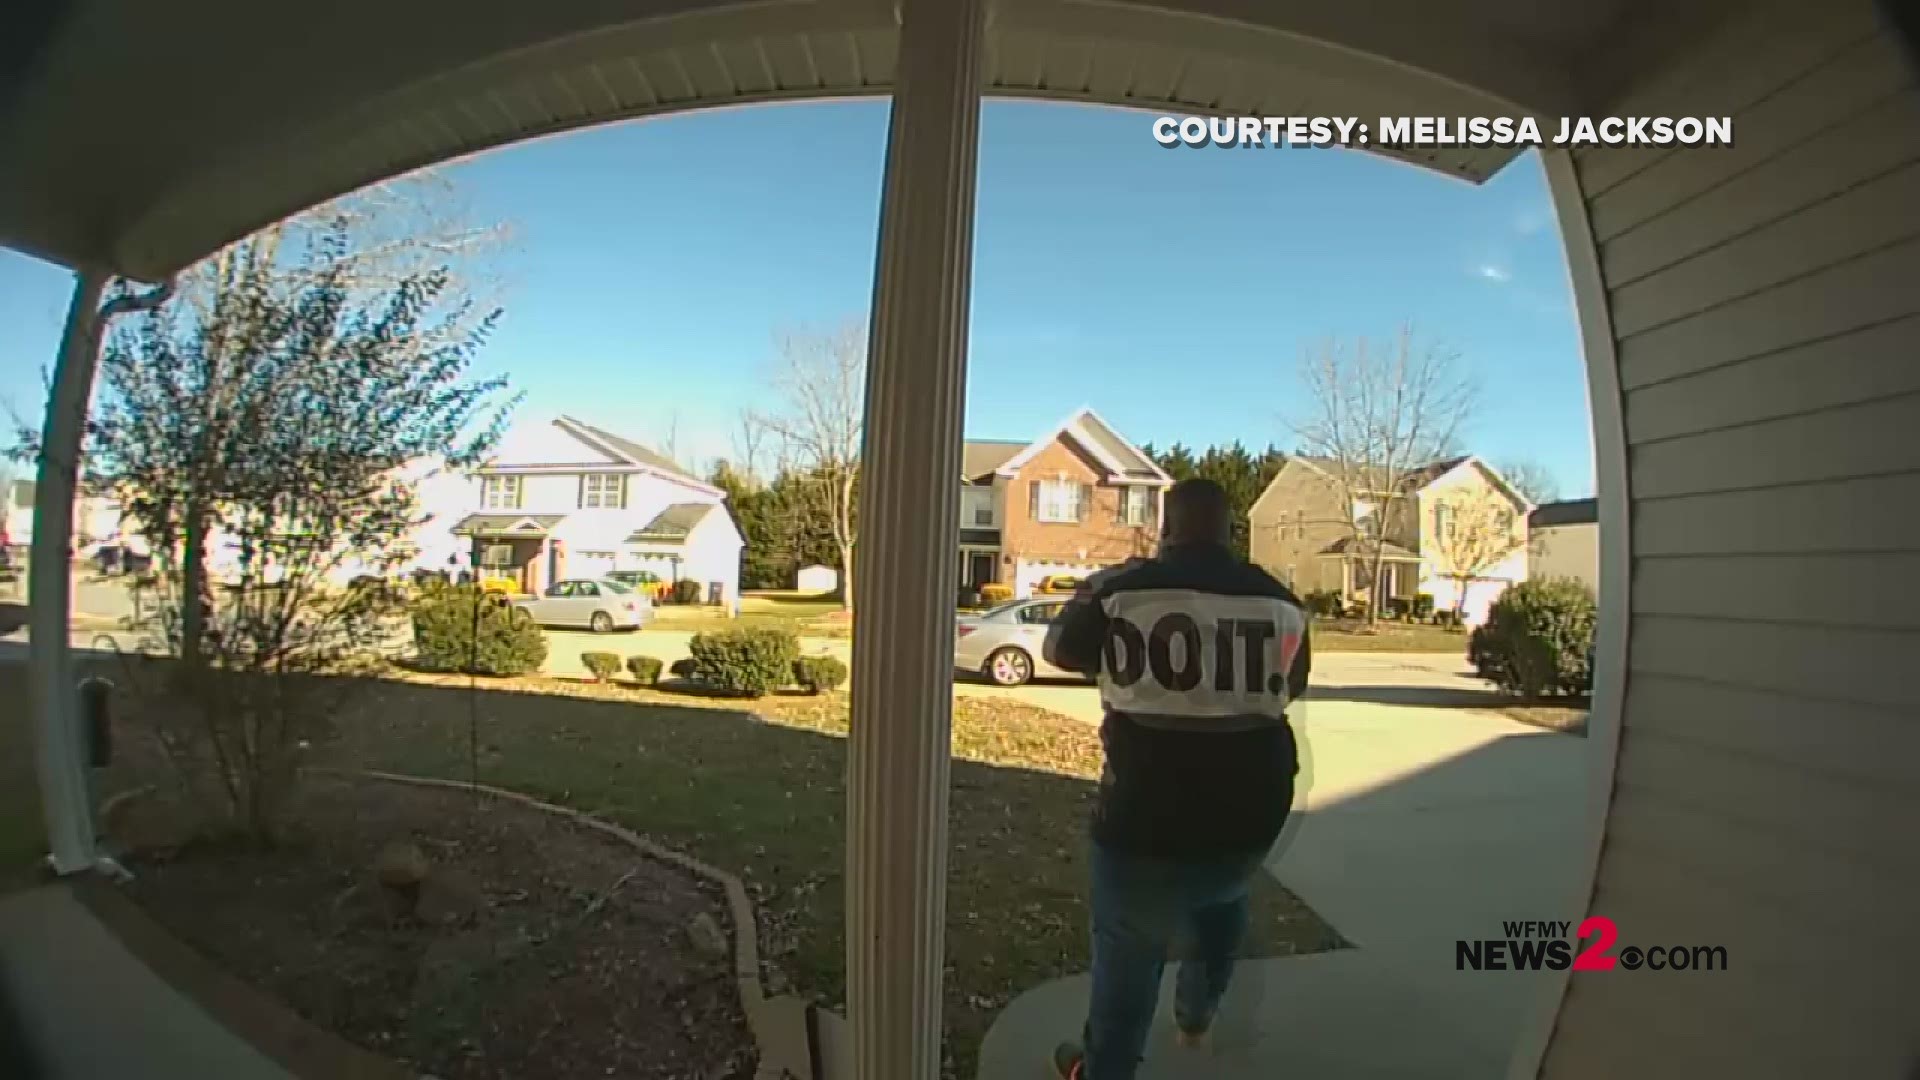 The video from Melissa Jackson's security camera doorbell shows a man coming up to her doorstep, walking away with two medium-sized boxes and getting in the passenger seat of a silver sedan leaving the scene.